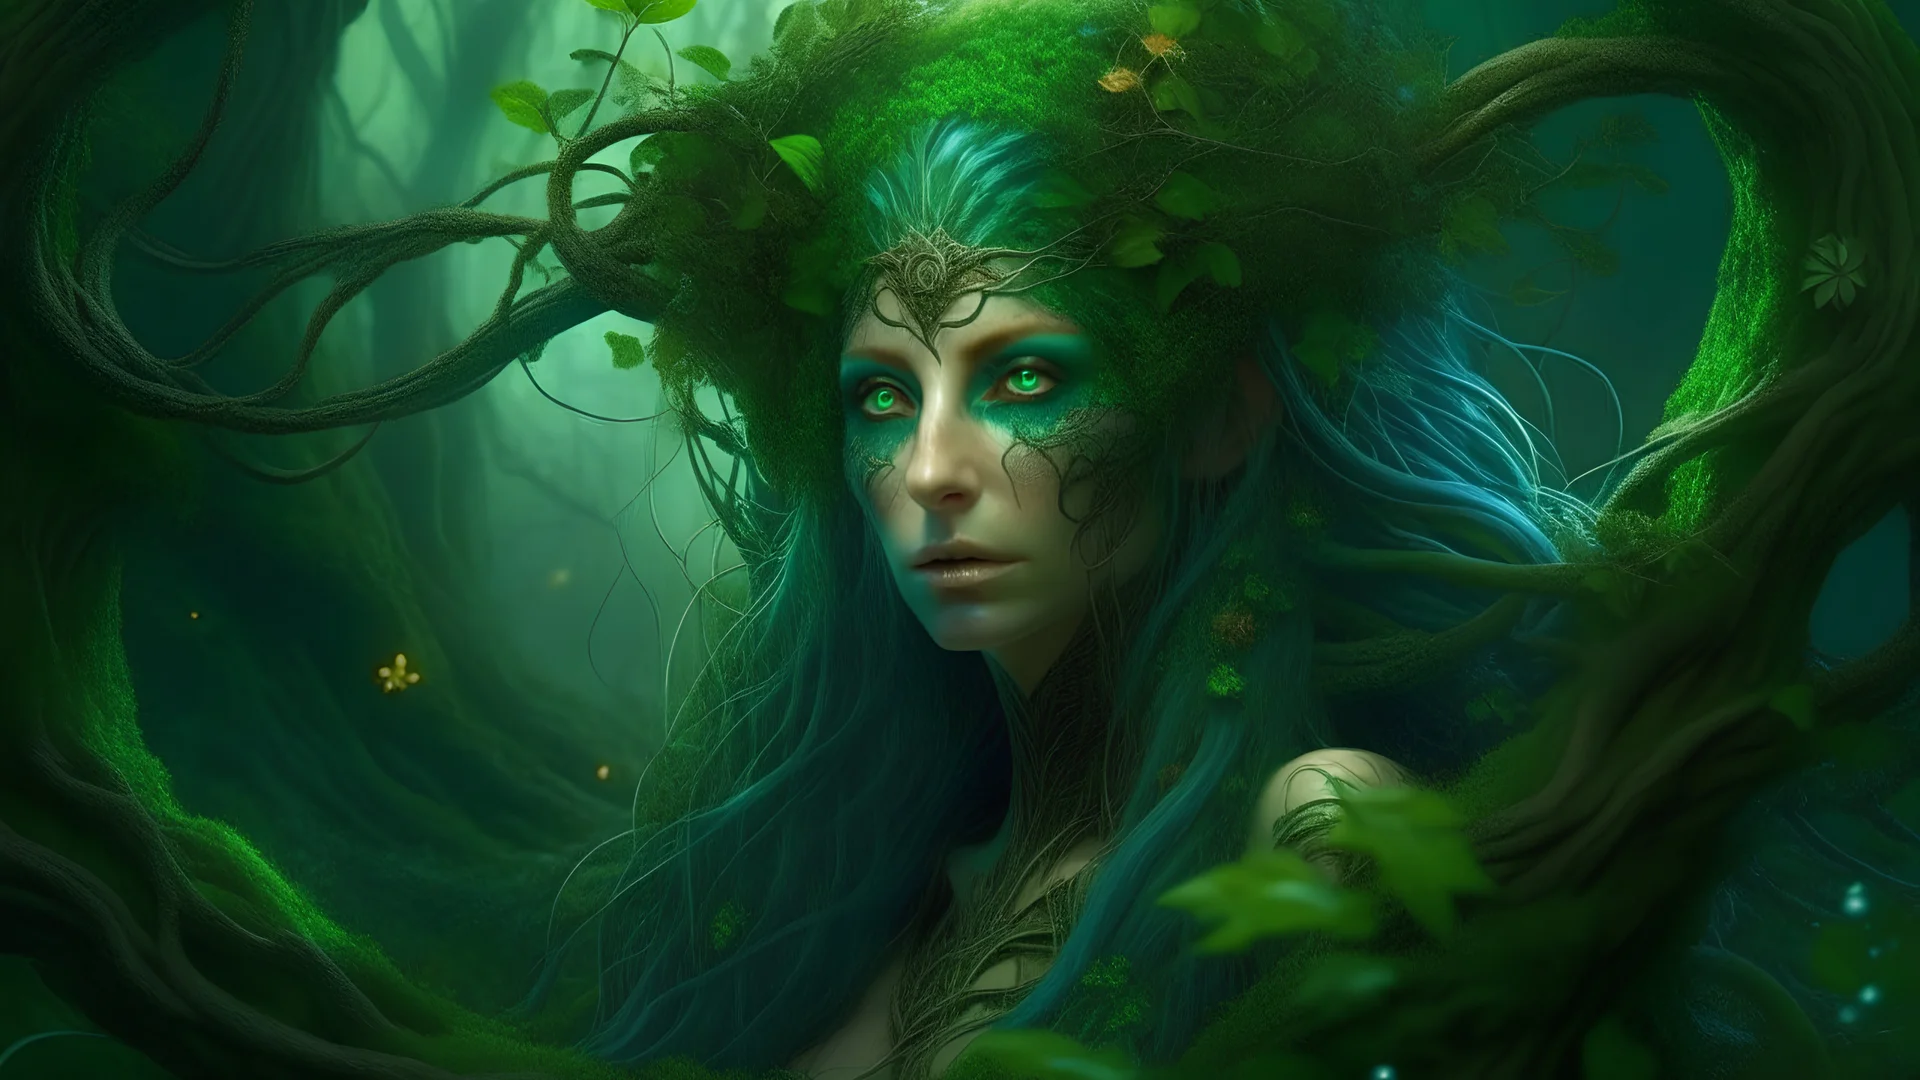 8K Ultra HD, highly detailed, we are transported to a mystical forest where the enigmatic beautiful Nature Witch resides, At the center of the painting stands the beautiful Nature Witch, a striking figure of ethereal beauty, Her presence is an embodiment of the very essence of nature itself, She has flowing, emerald-green hair that appears to be woven from the very vines and leaves that surround her, Her eyes, as deep as the forest itself, radiate a gentle wisdom and connection to all living thi